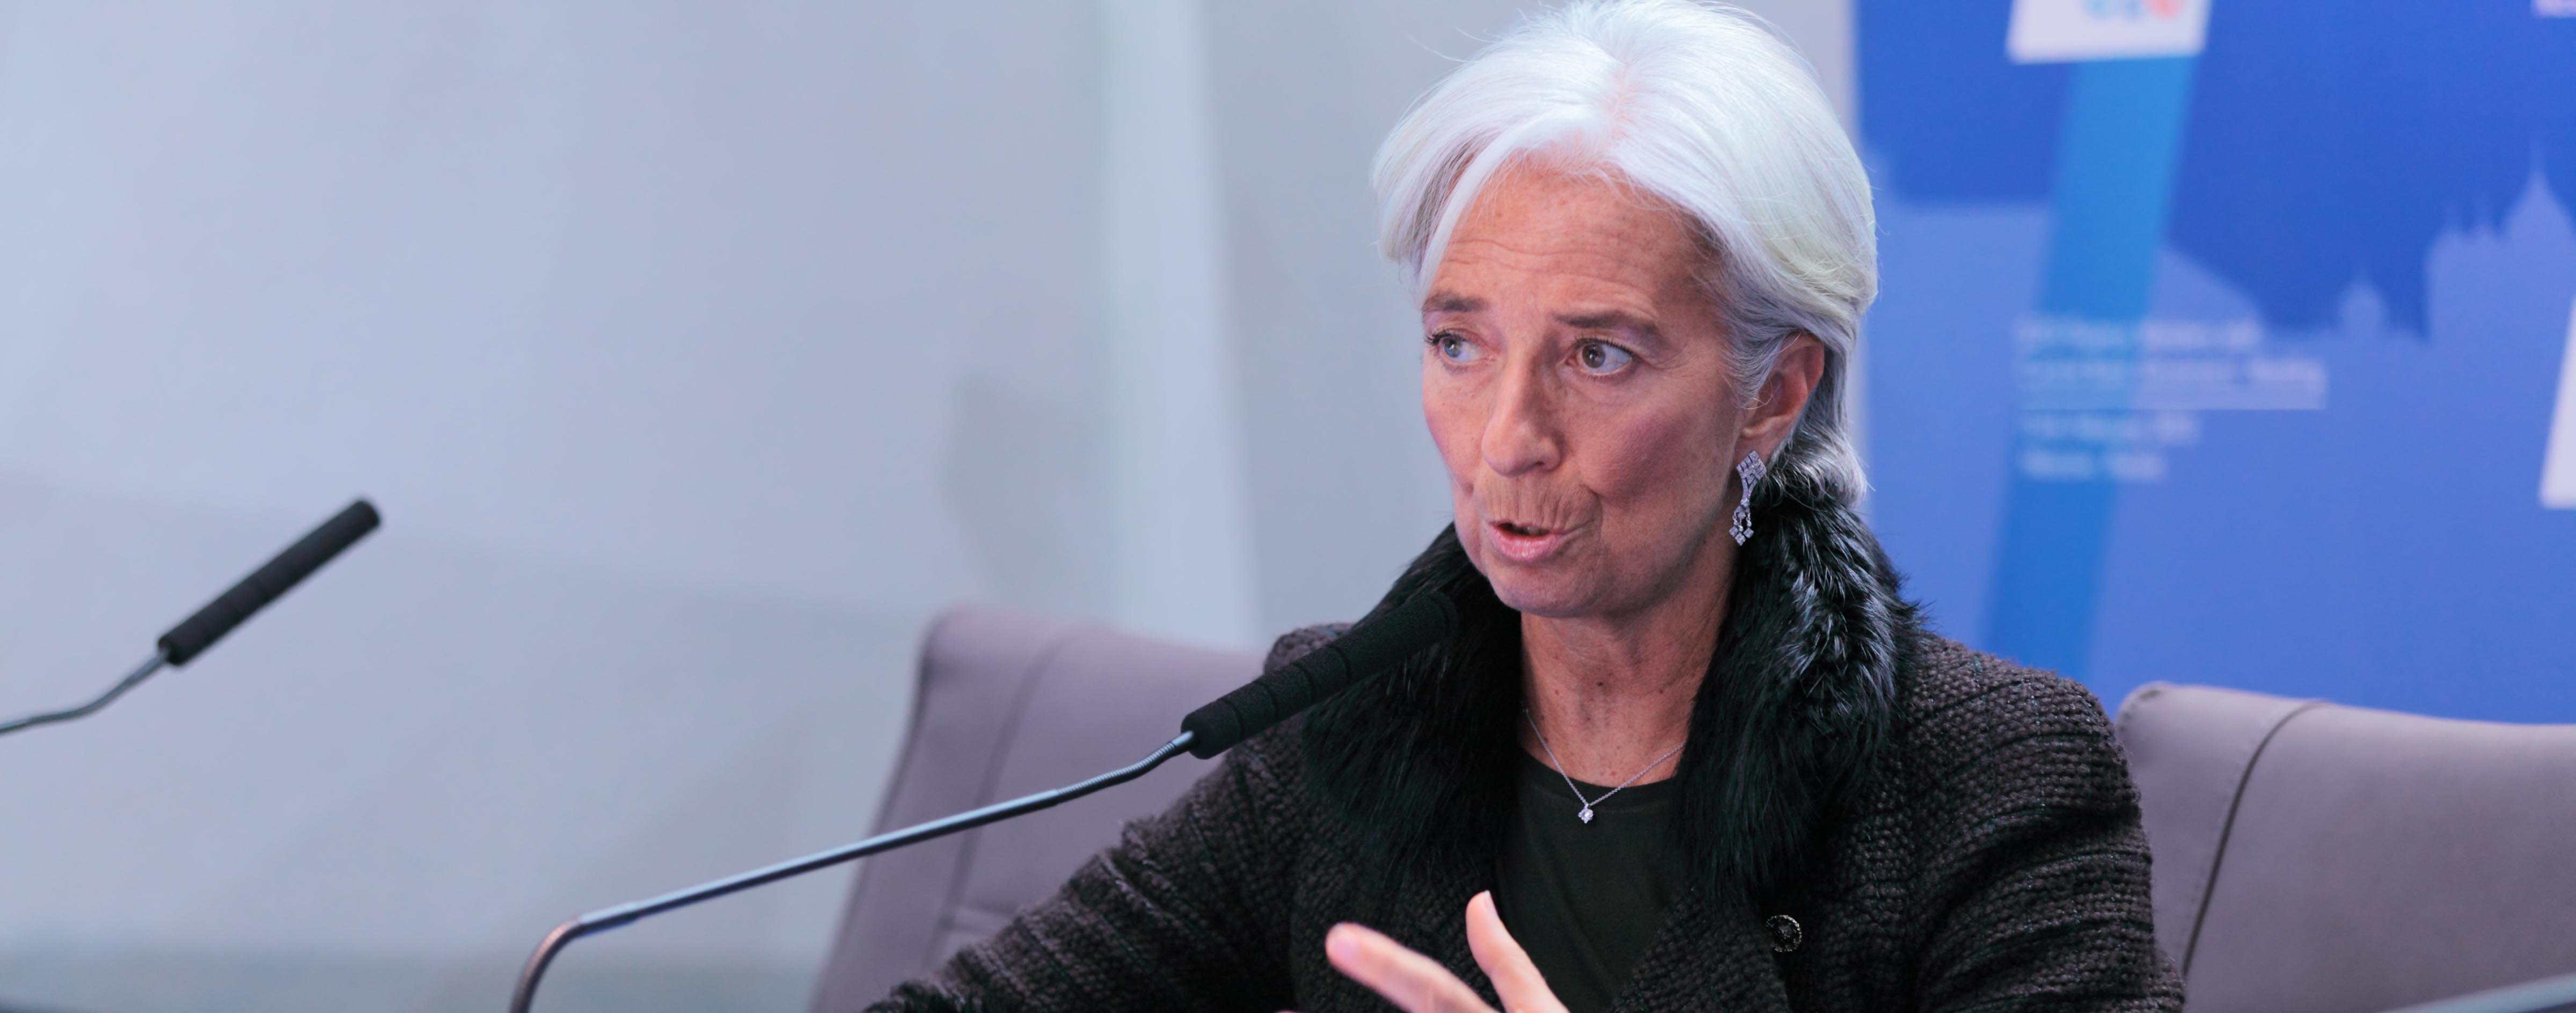 IMF suggests policies to spur global growth